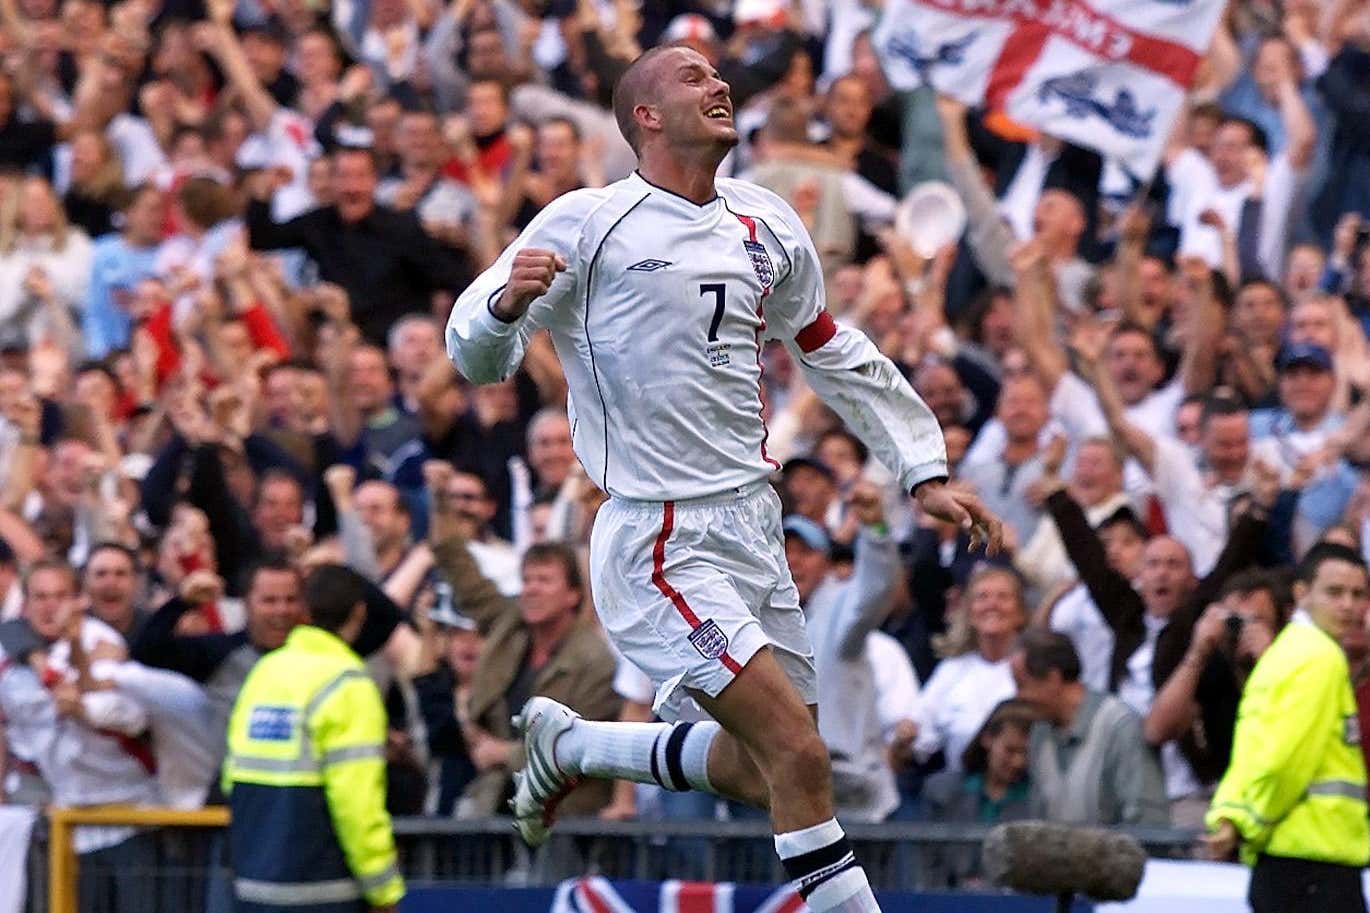 10 years ago to the day, David Beckham played his last game in the